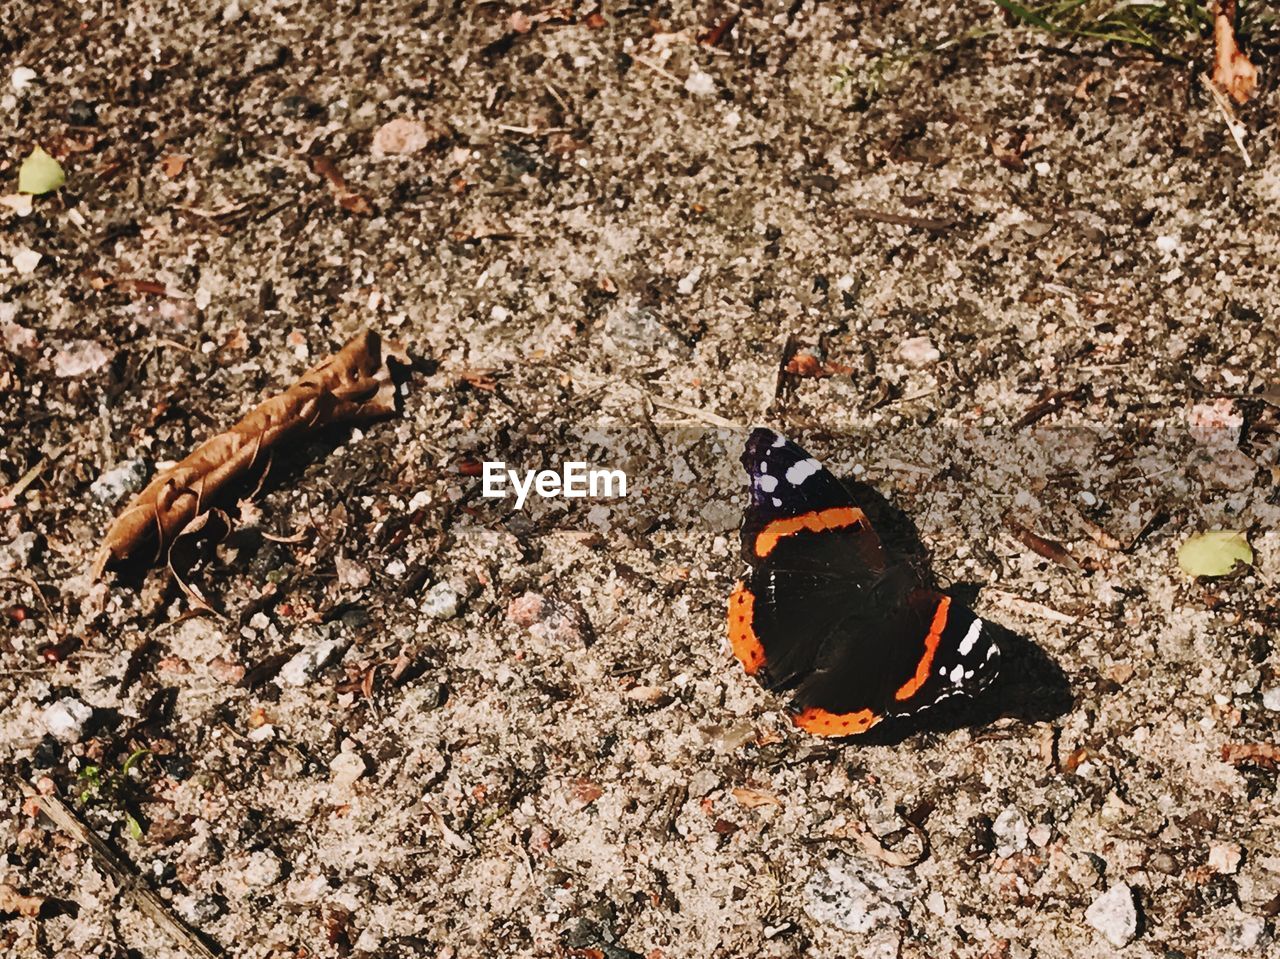 HIGH ANGLE VIEW OF INSECT ON GROUND